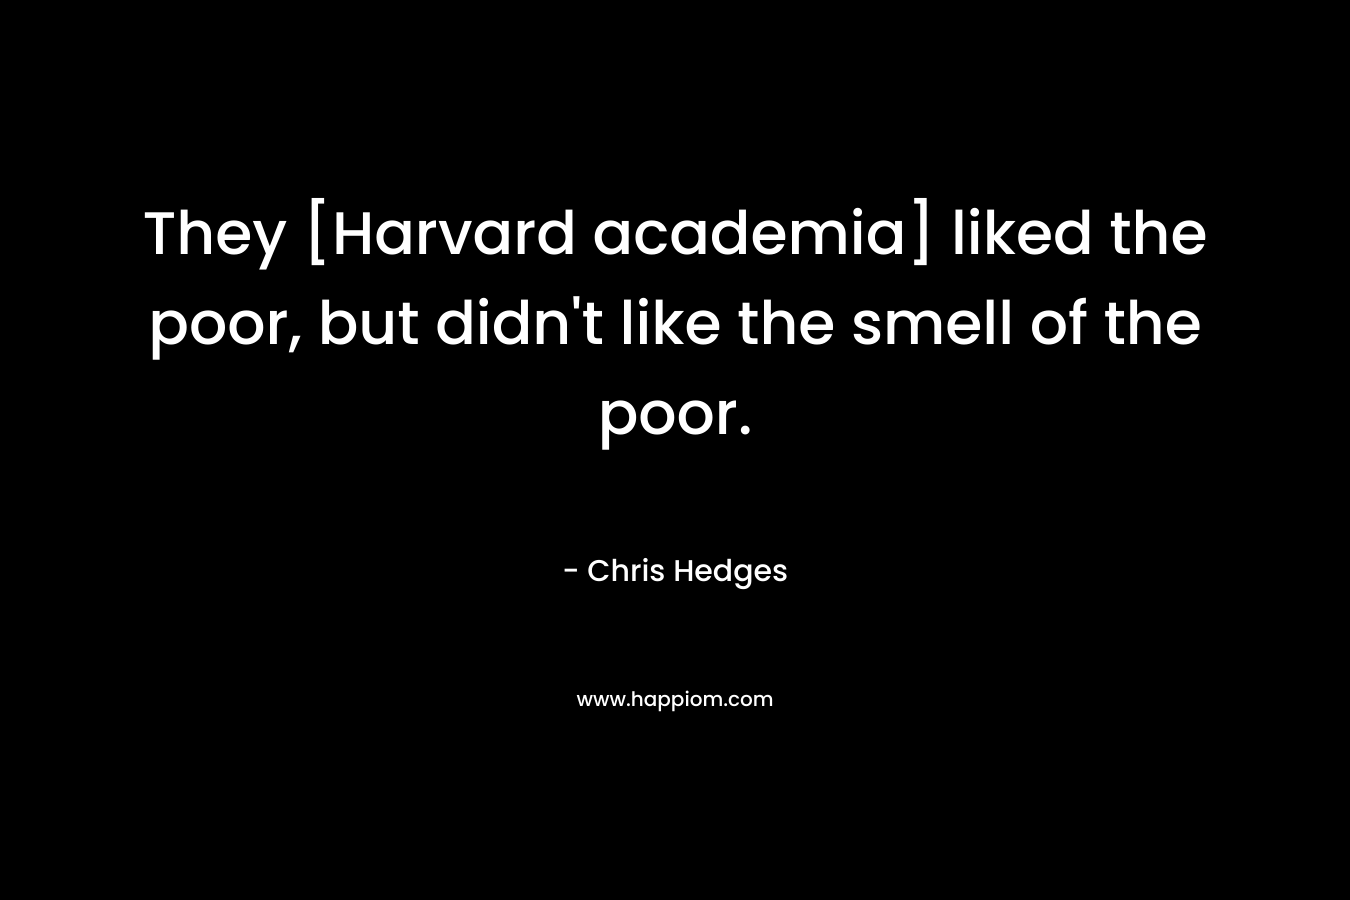 They [Harvard academia] liked the poor, but didn’t like the smell of the poor. – Chris Hedges